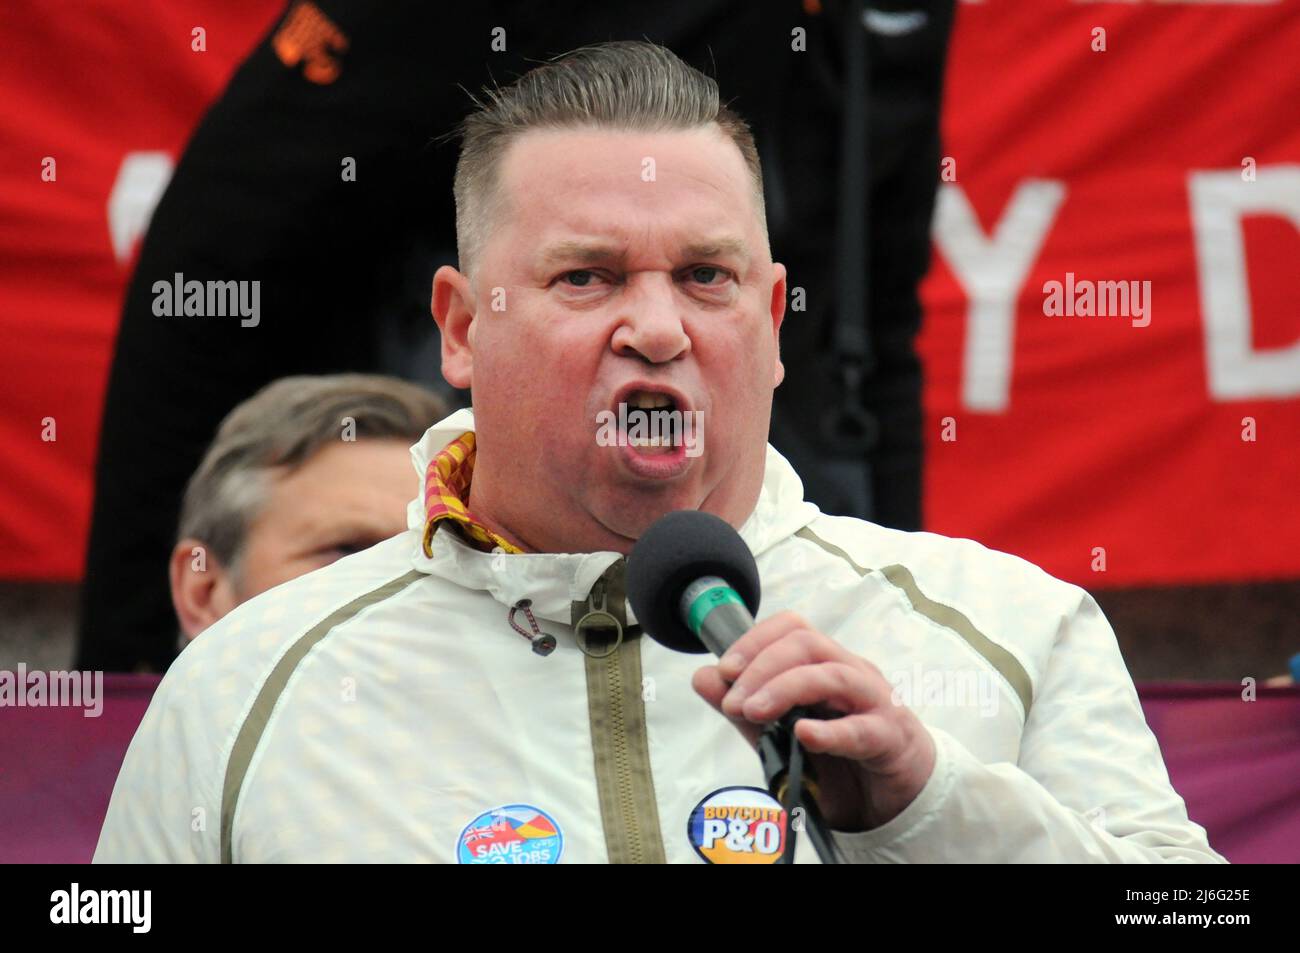 London Uk 1 May 22 Alex Gordon Rmt President Speaks At The Rally London May Day Parade Returns Credit Johnny Armstead Alamy Live News Stock Photo Alamy